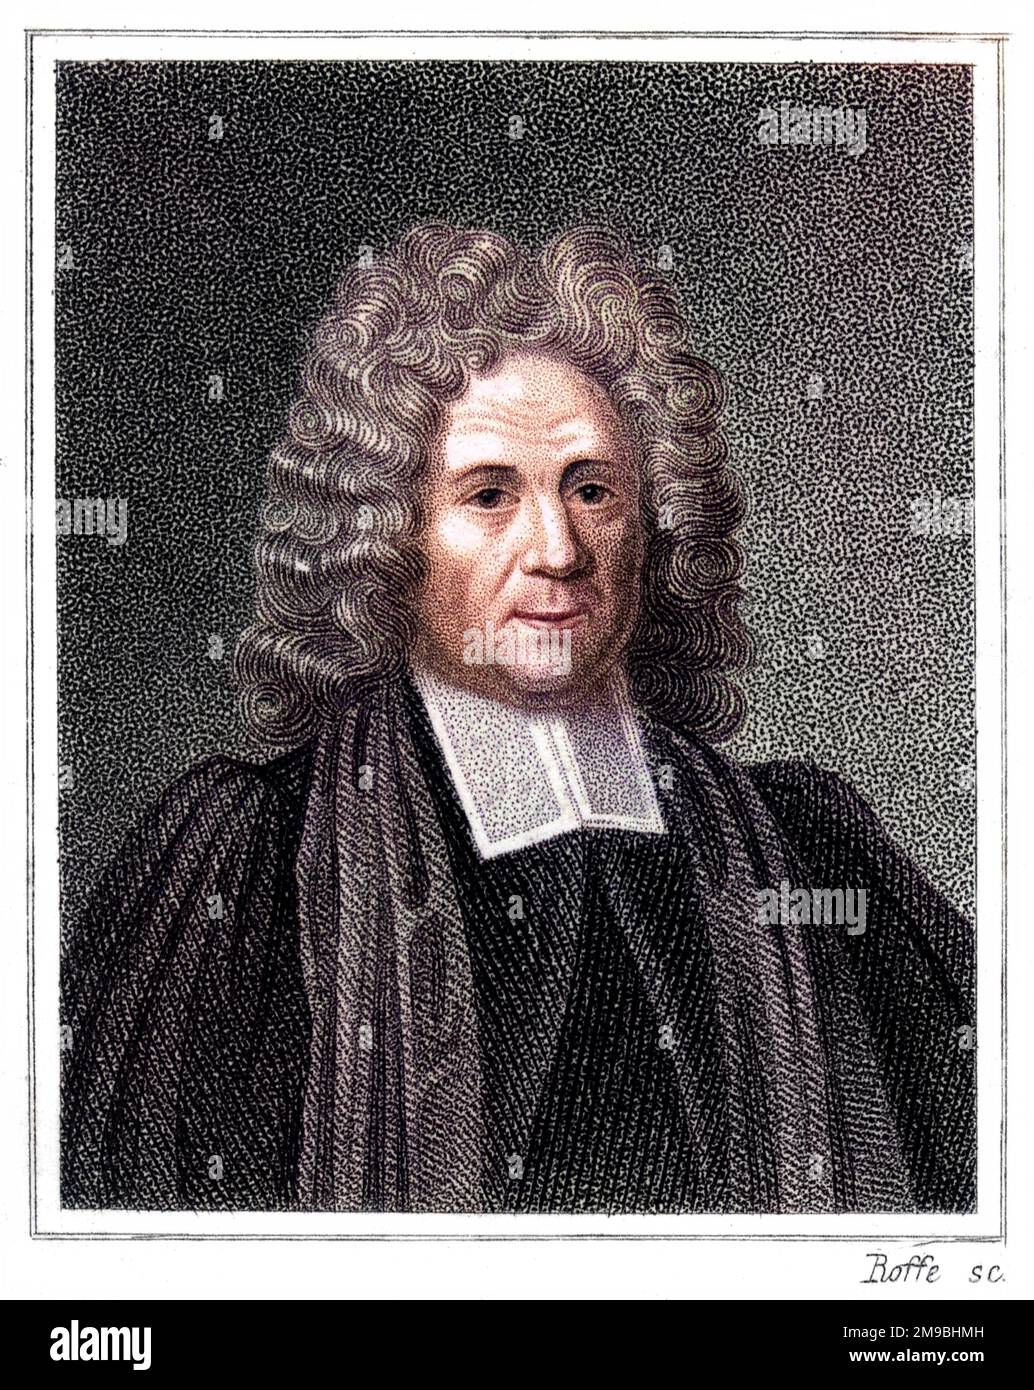 EDMUND HICKERINGILL - Engliah churchman, soldier in Scotland, Swedish ambassador to England, traveller in West Indies, wrote scurrilous attacks on the Church, etc. Stock Photo